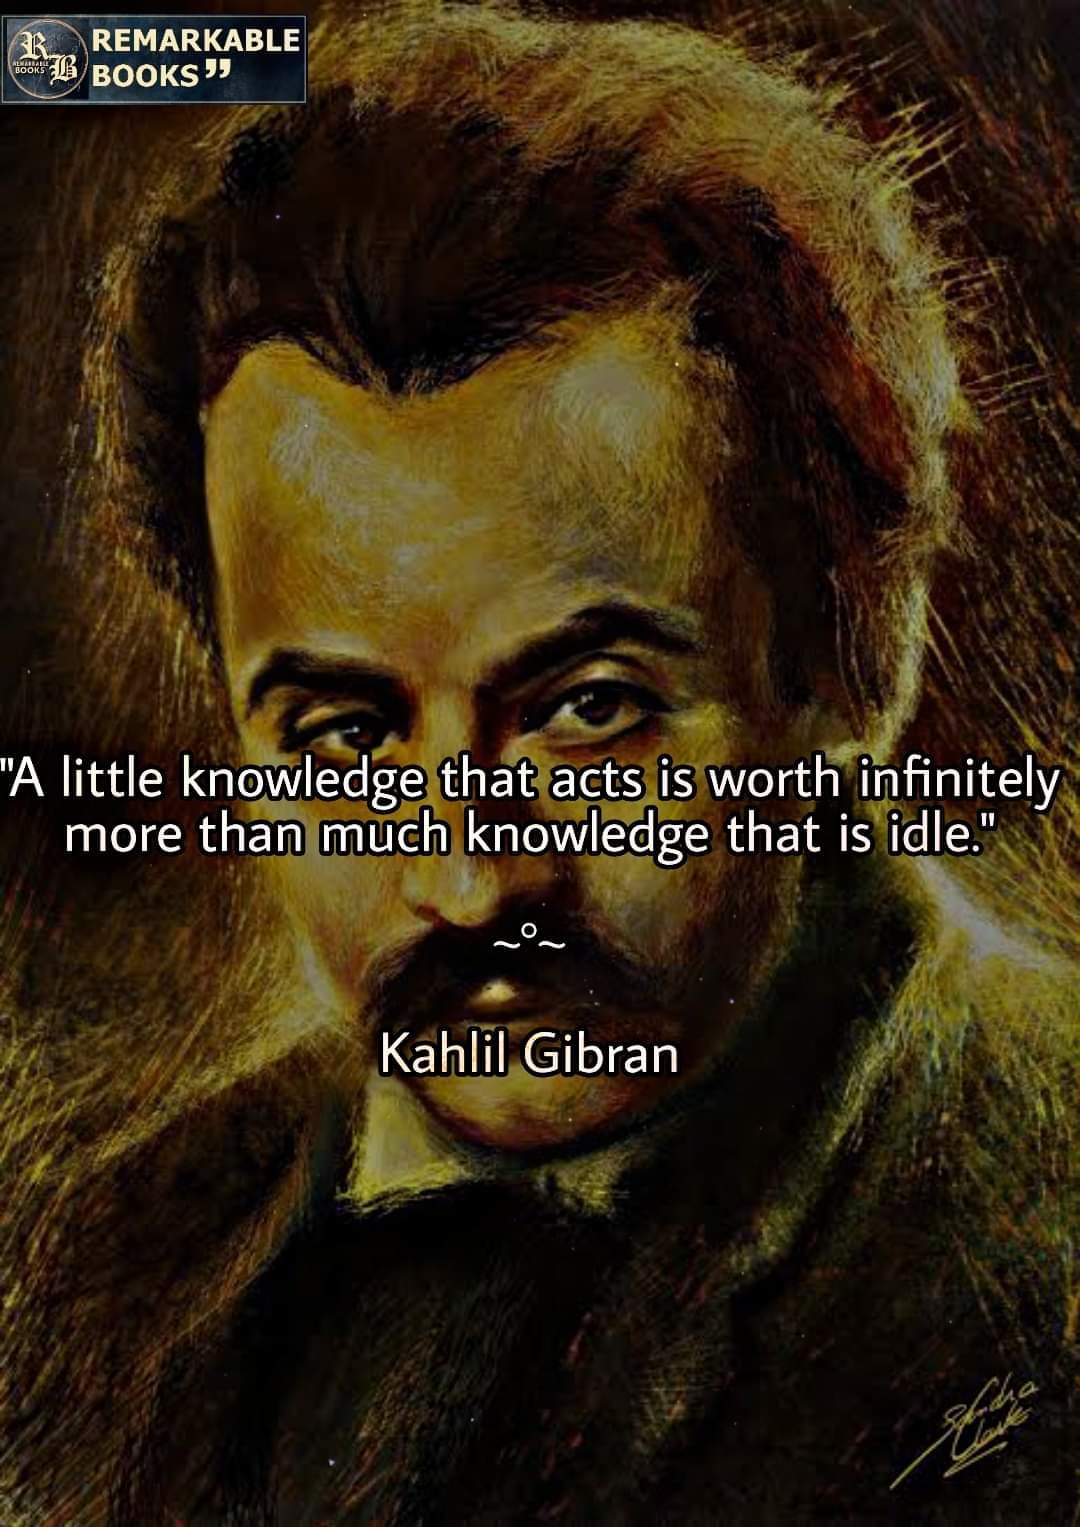 A little knowledge that acts is worth infinitely more than much knowledge that is idle.